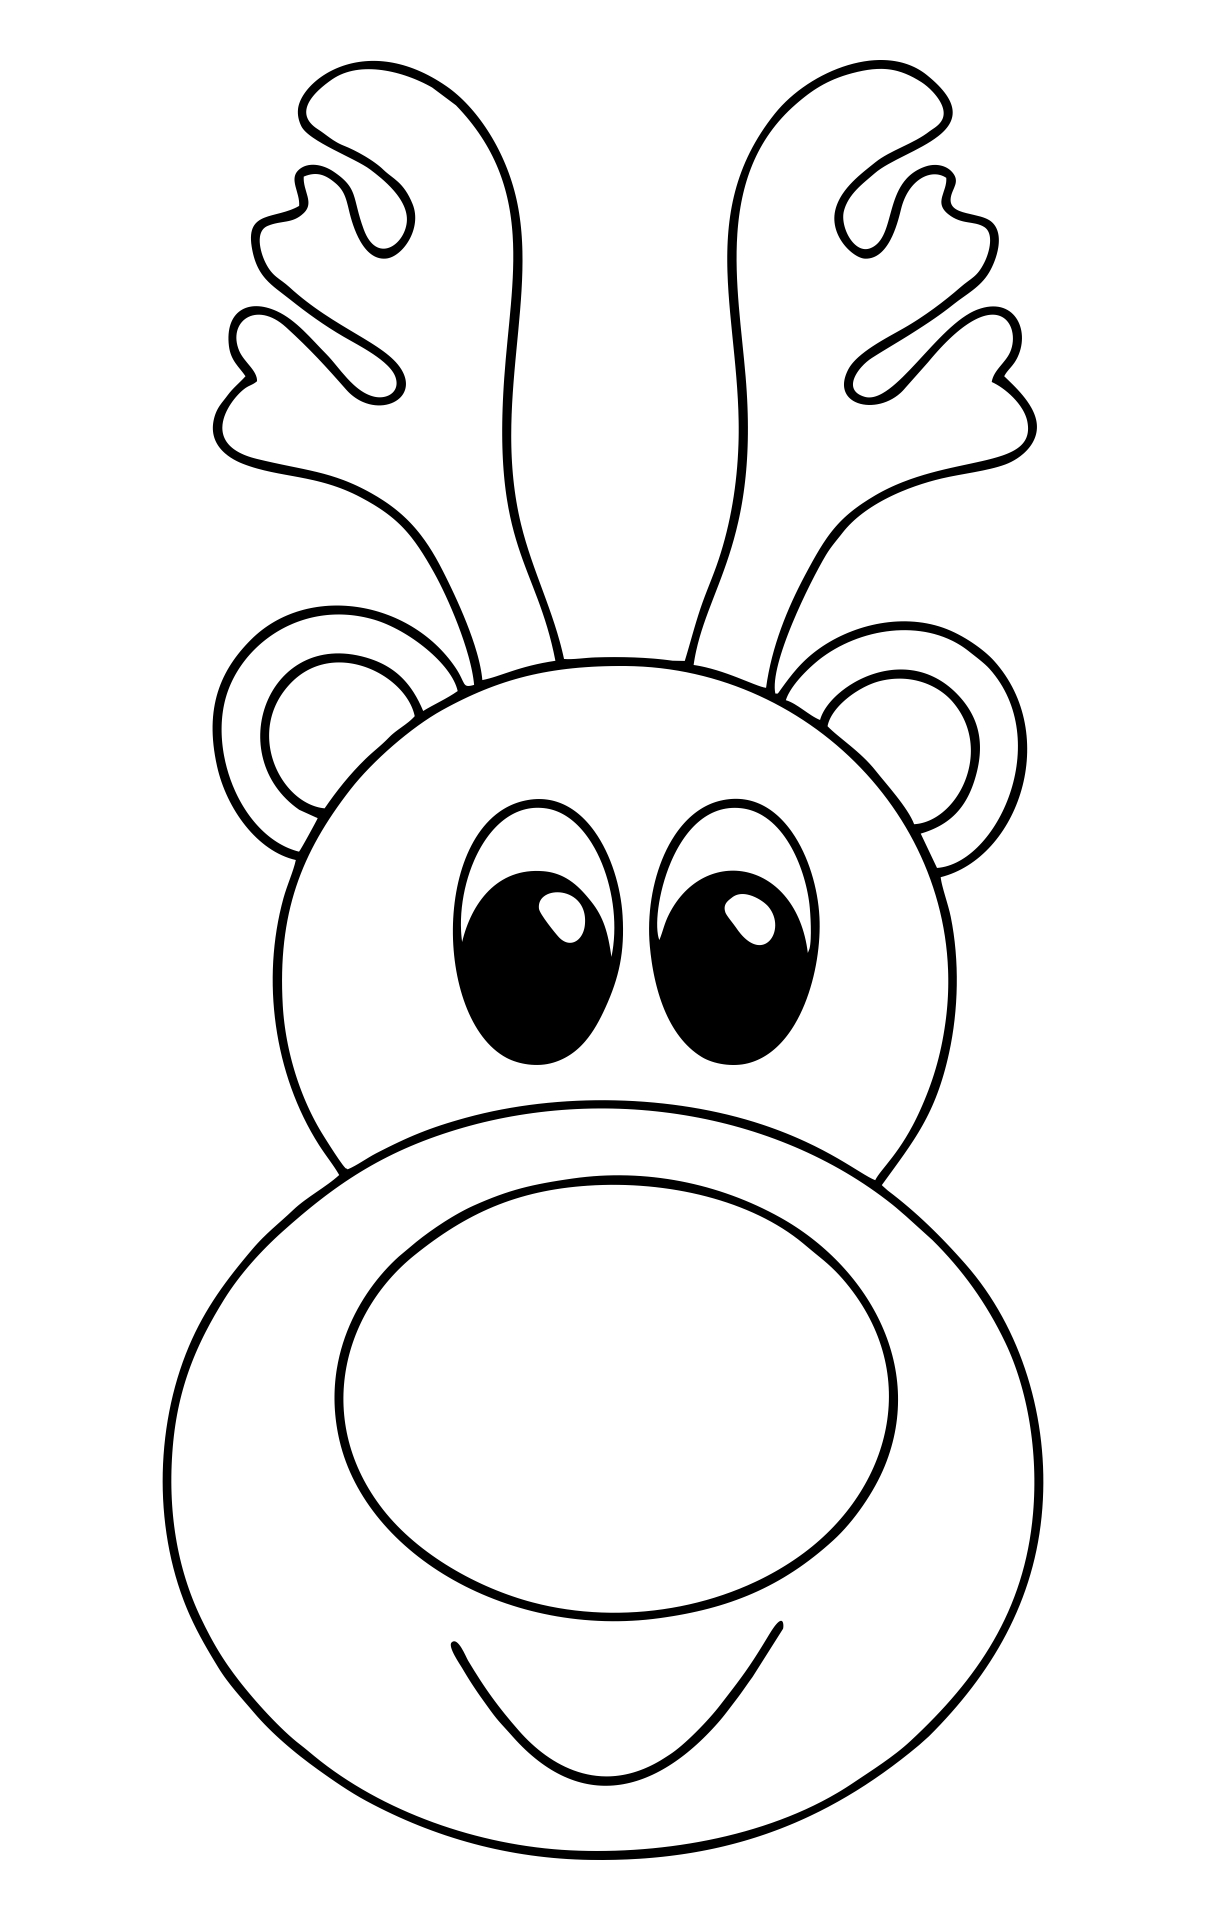 cut-out-reindeer-template-printable-printable-templates